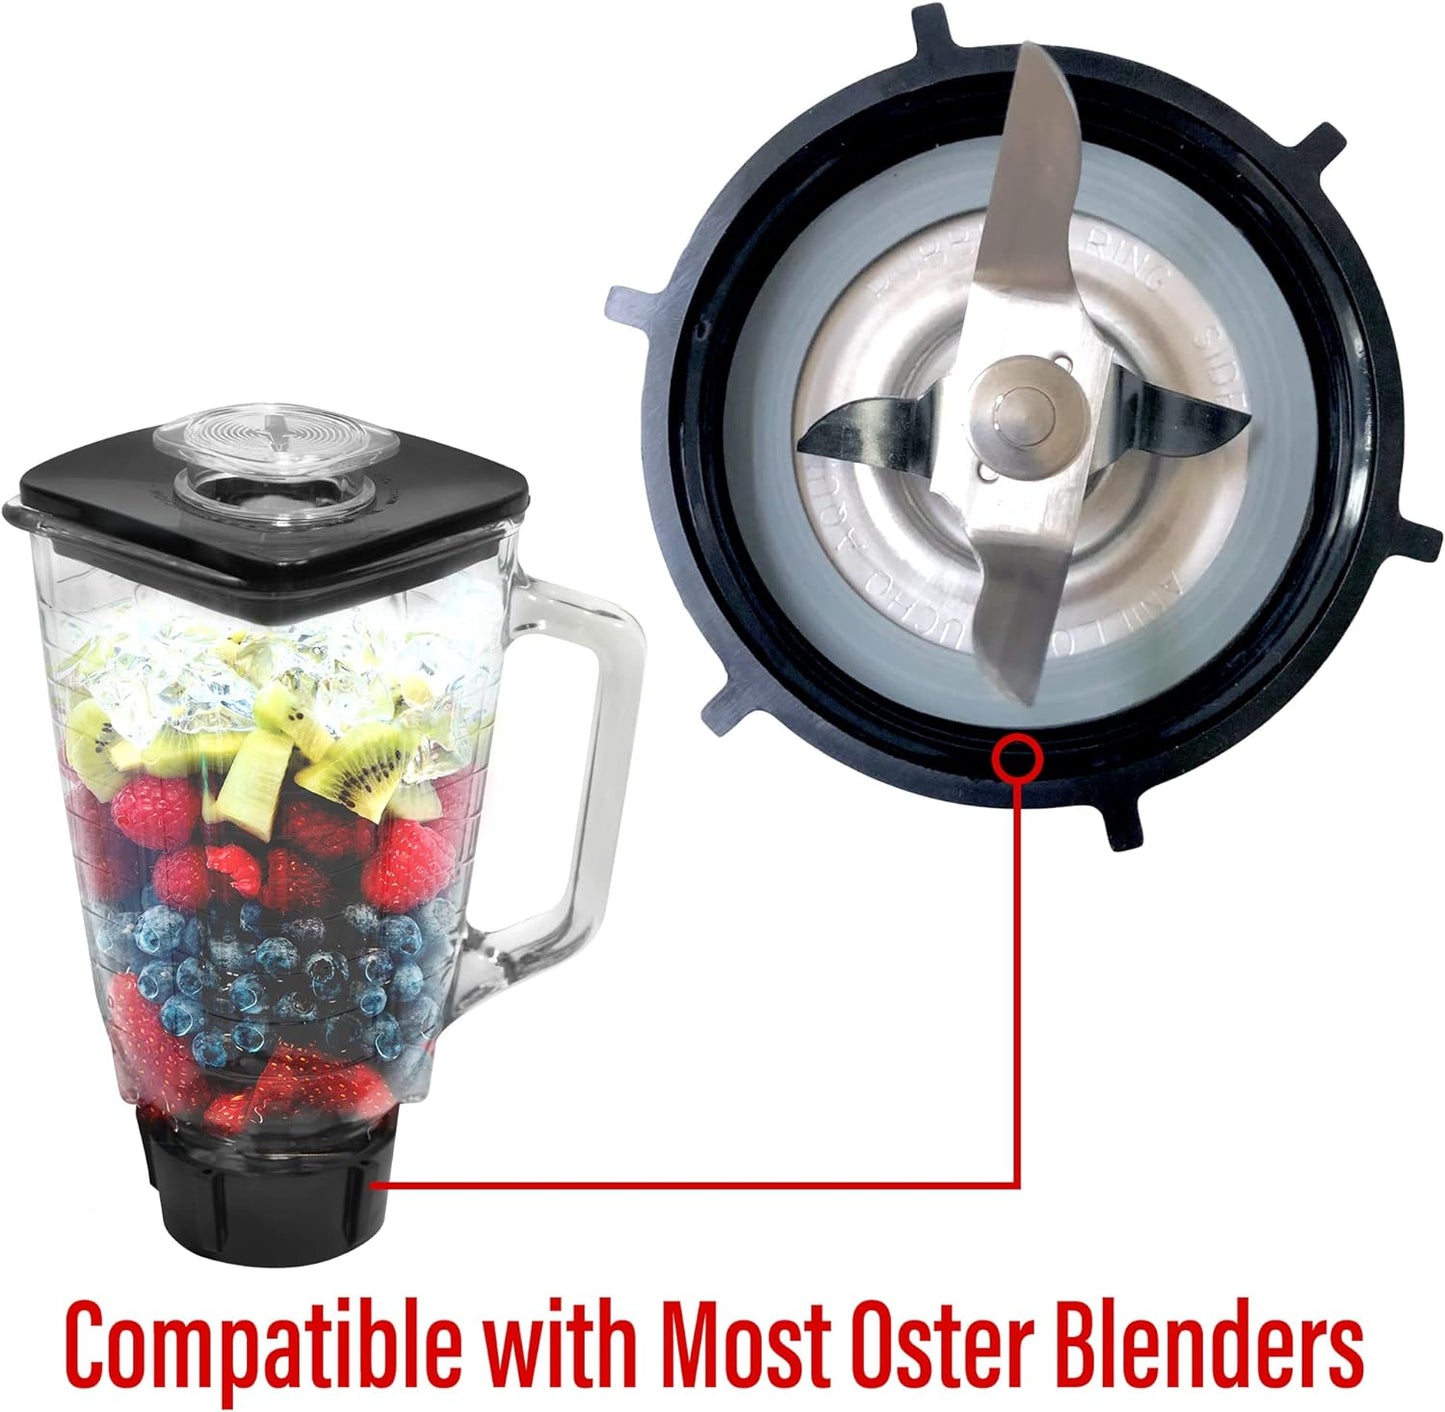 Brentwood Replacement Blade Kit for Oster Blenders